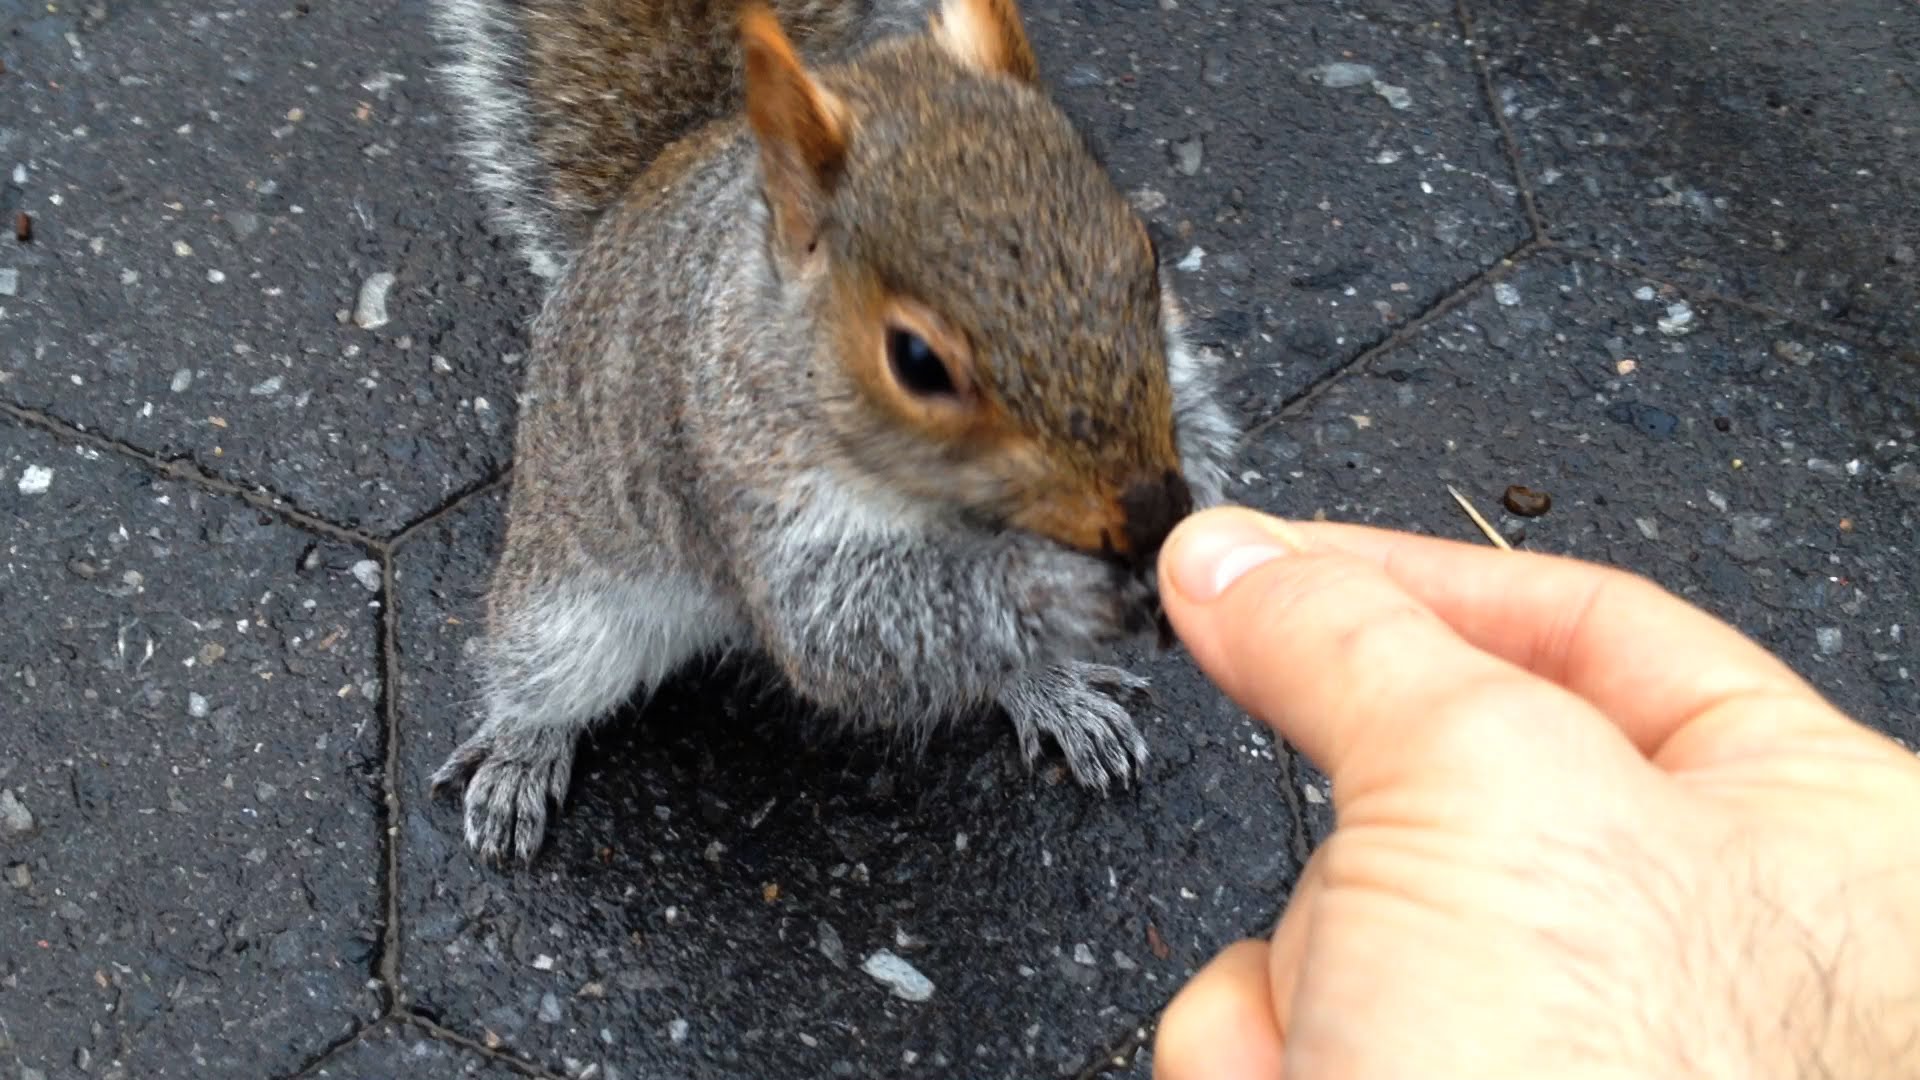 Squirrels Battery Park New York City - YouTube